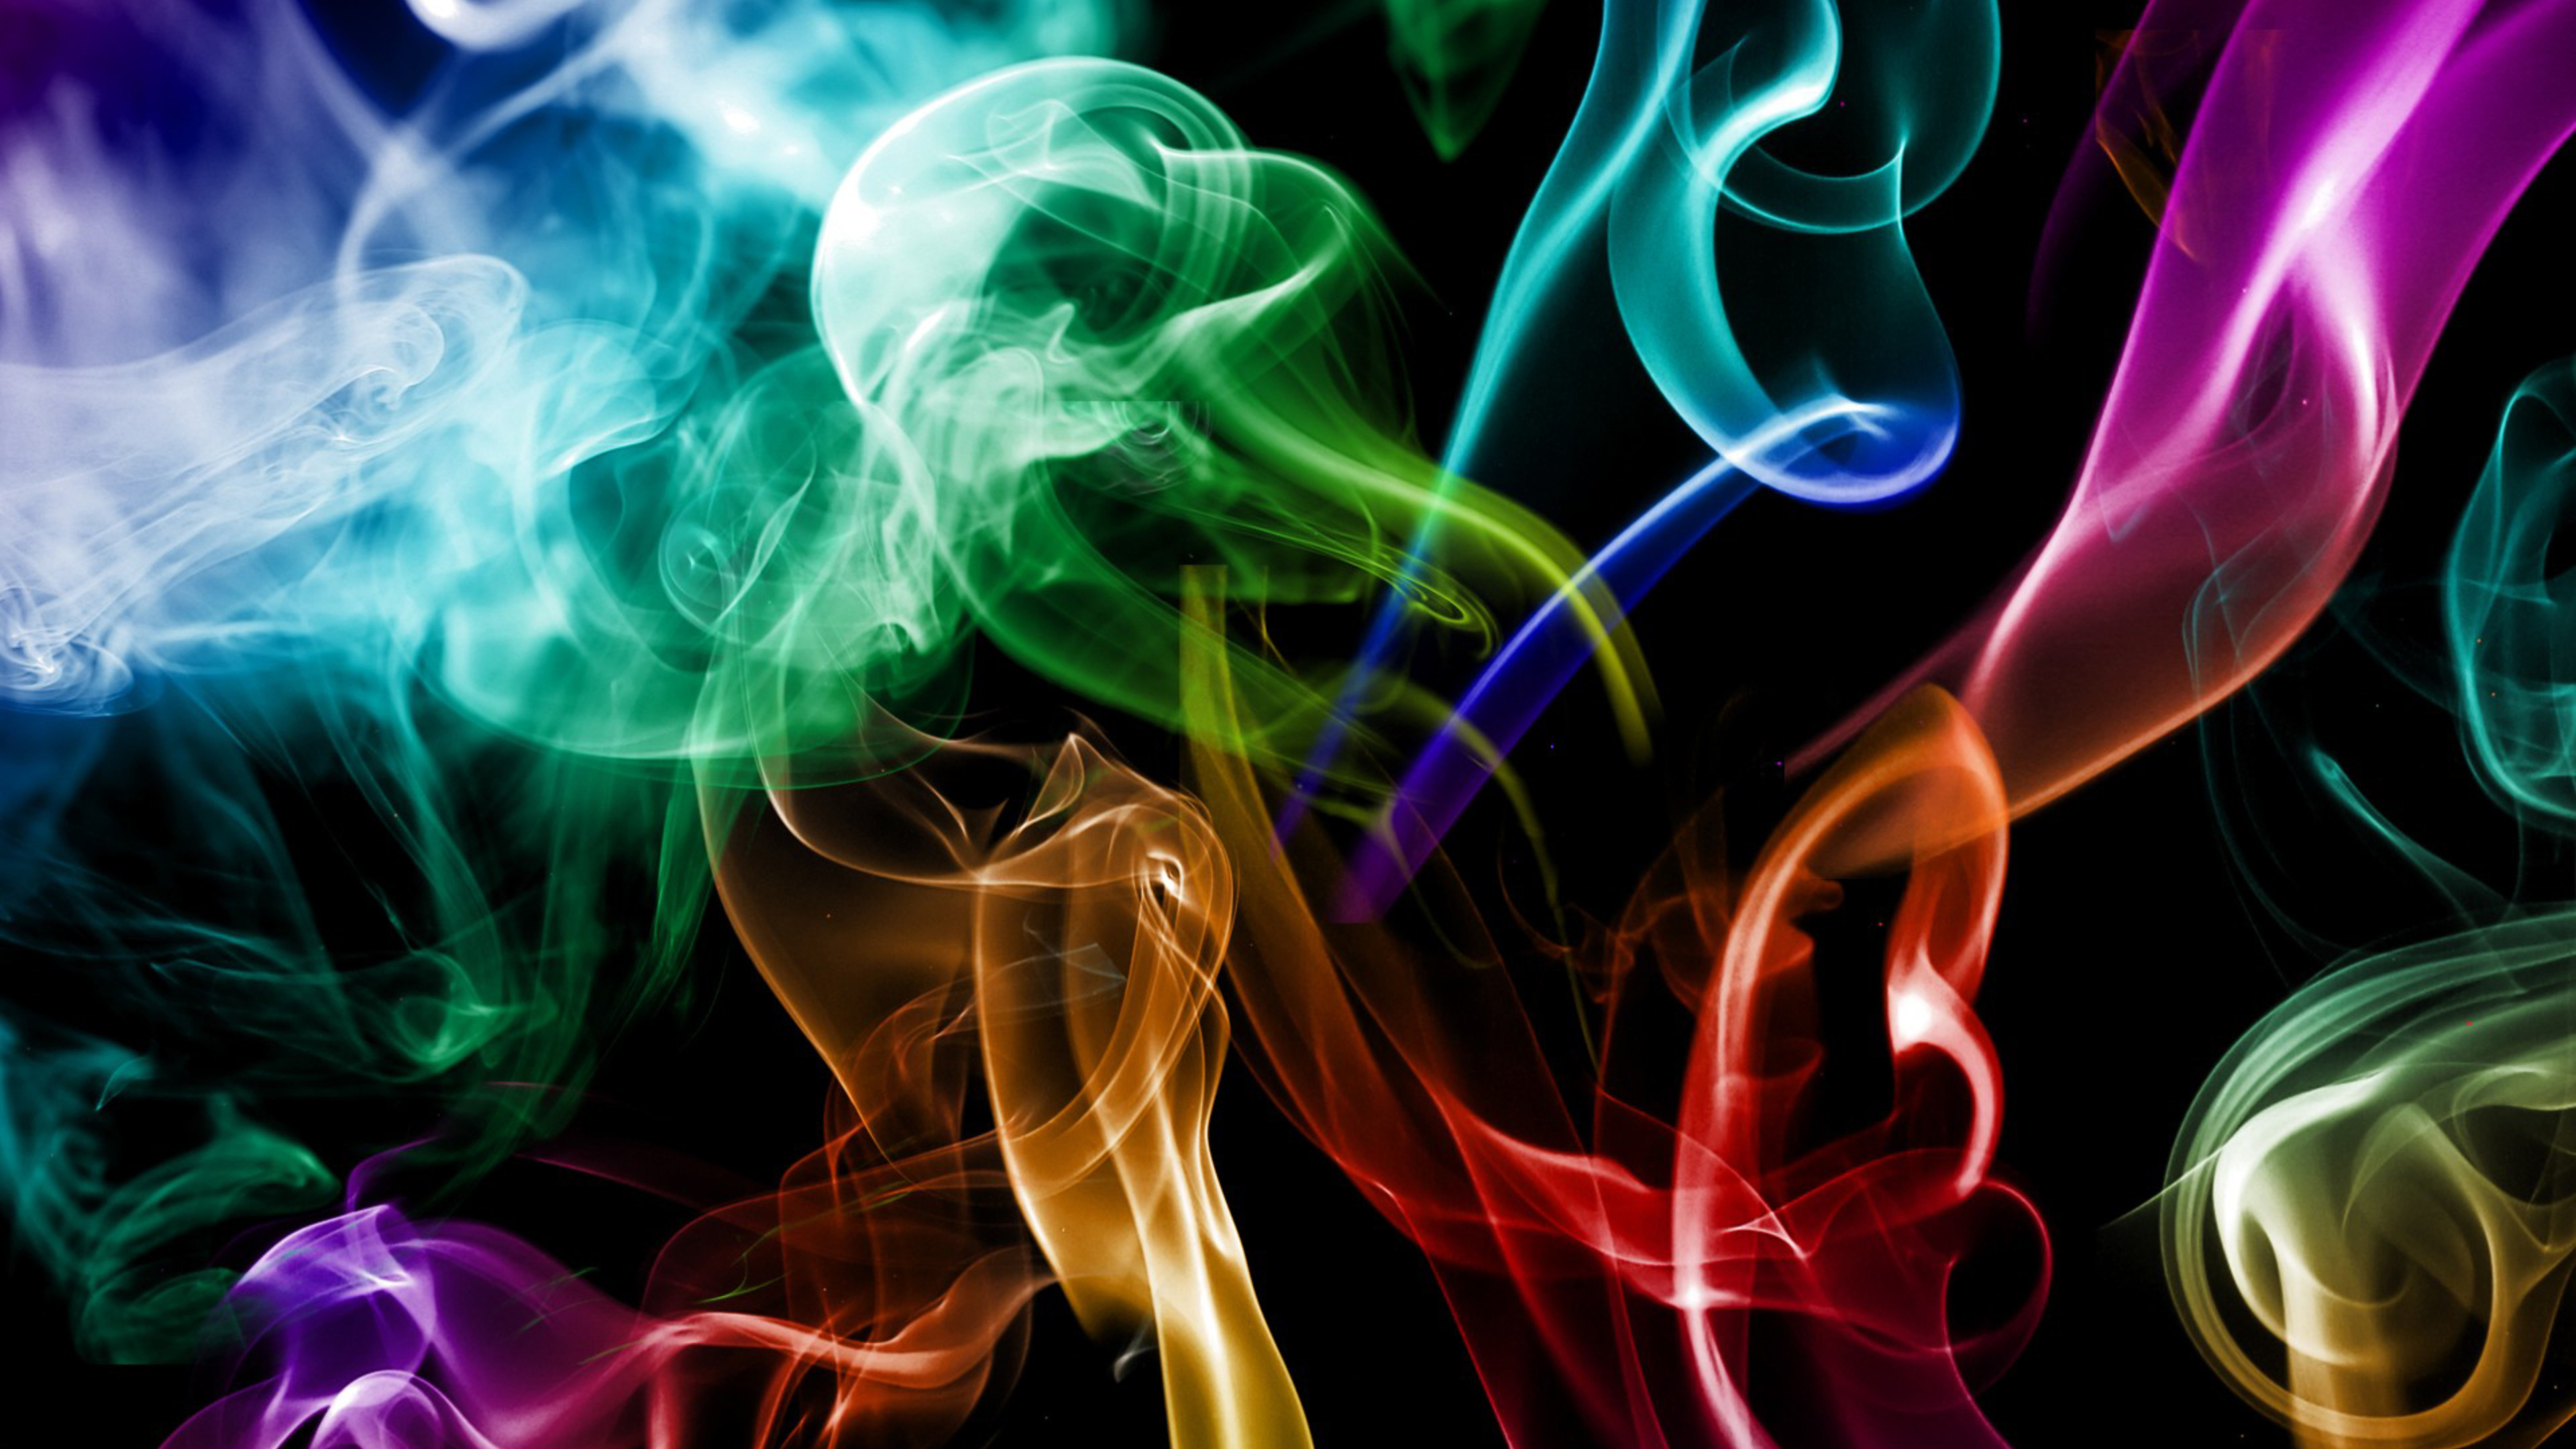 Color Smoke Blue Red Green Purple Yellow Smoke Wallpapers 4k Wallpaper  Download For Desktop Mobile Phones And Laptops : 